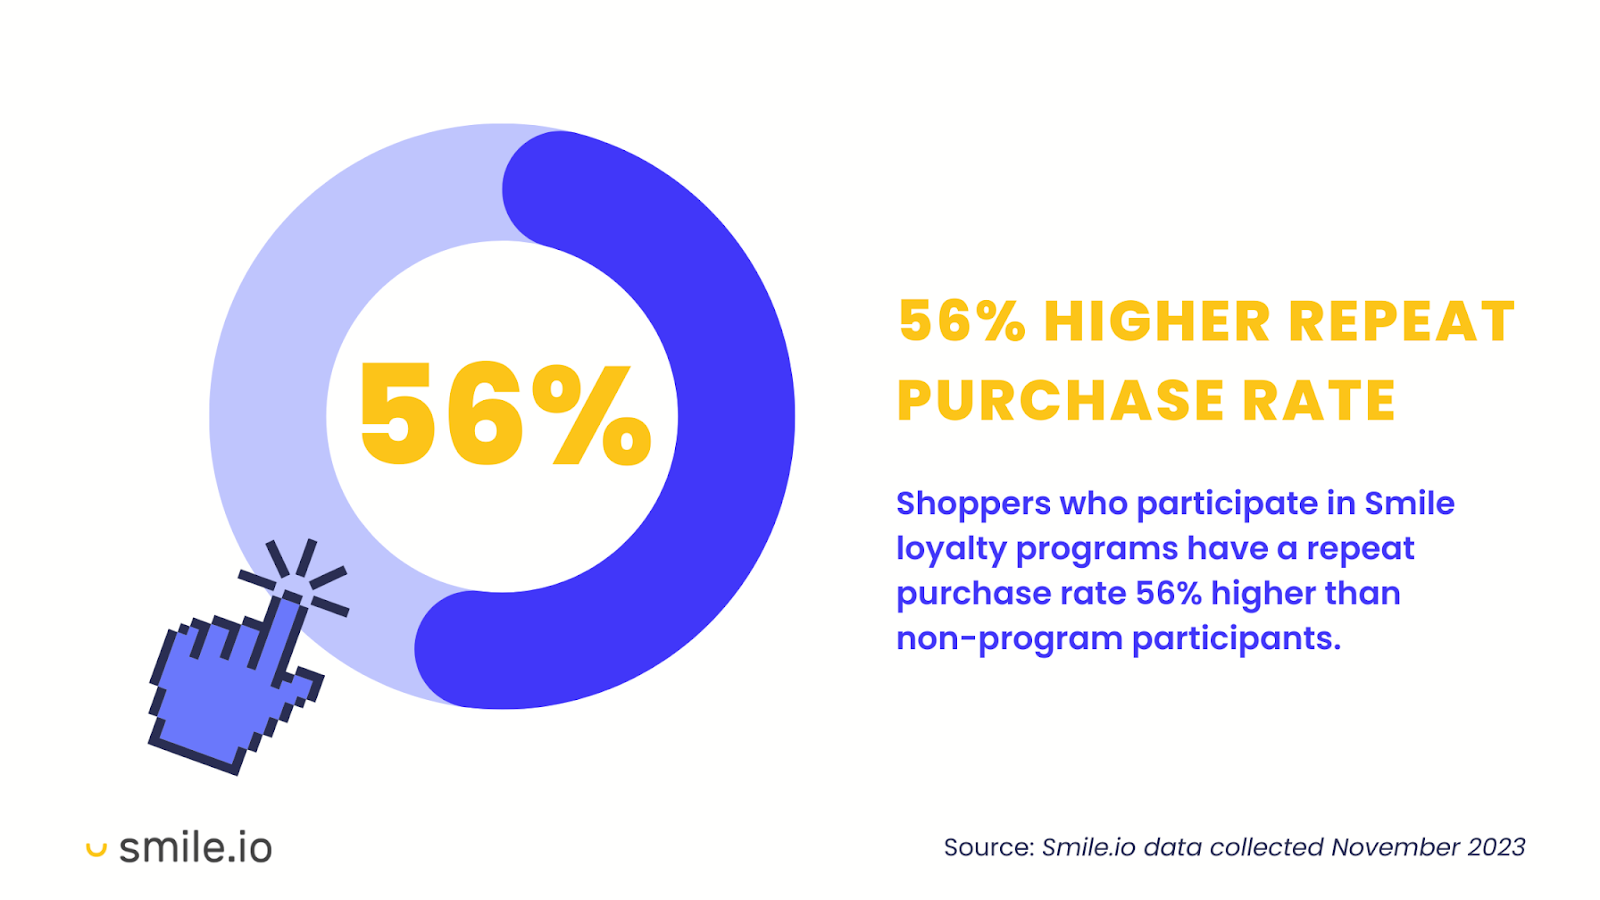 A circular progress ring graph showing that customers who participate in Smile loyalty programs have a repeat purchase rate 56% higher than non-program participants. 